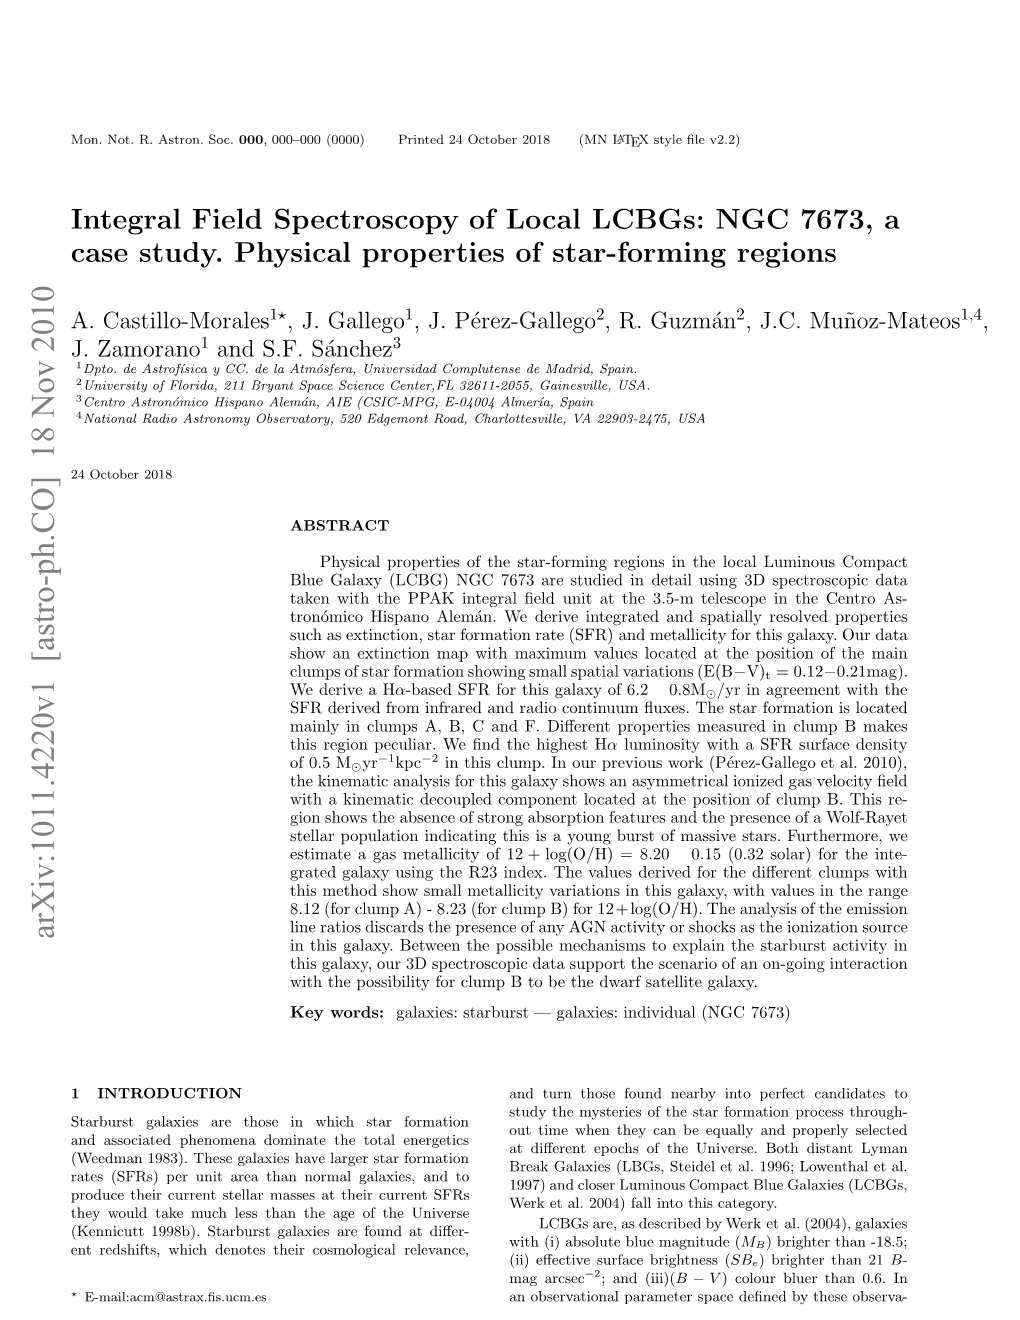 Integral Field Spectroscopy of Local Lcbgs: NGC 7673, a Case Study